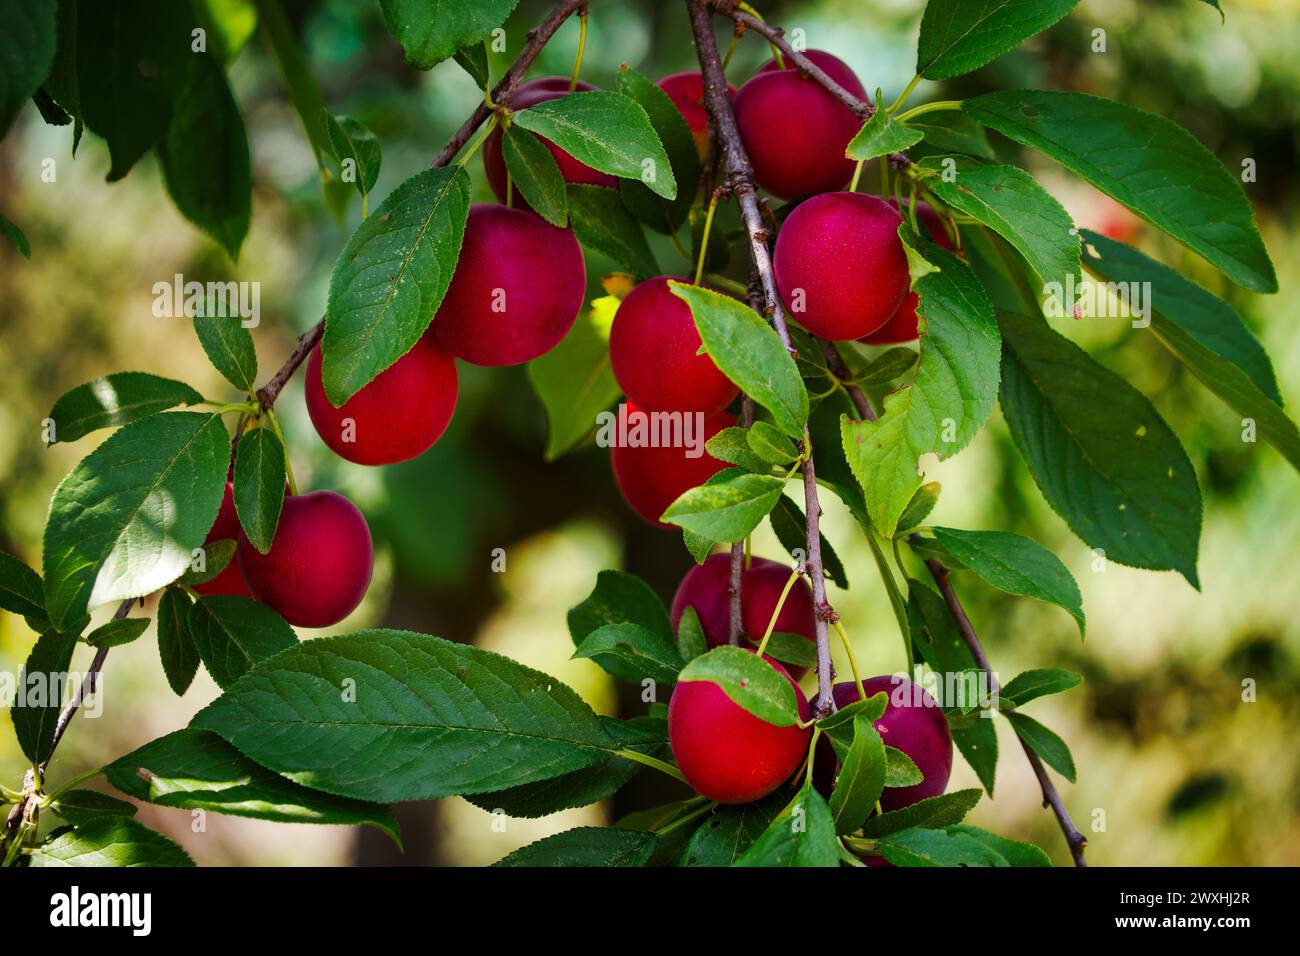 A detailed view of cherry plums with varying shades of red and orange. Suitable for botanical studies or nature-themed content. Stock Photo